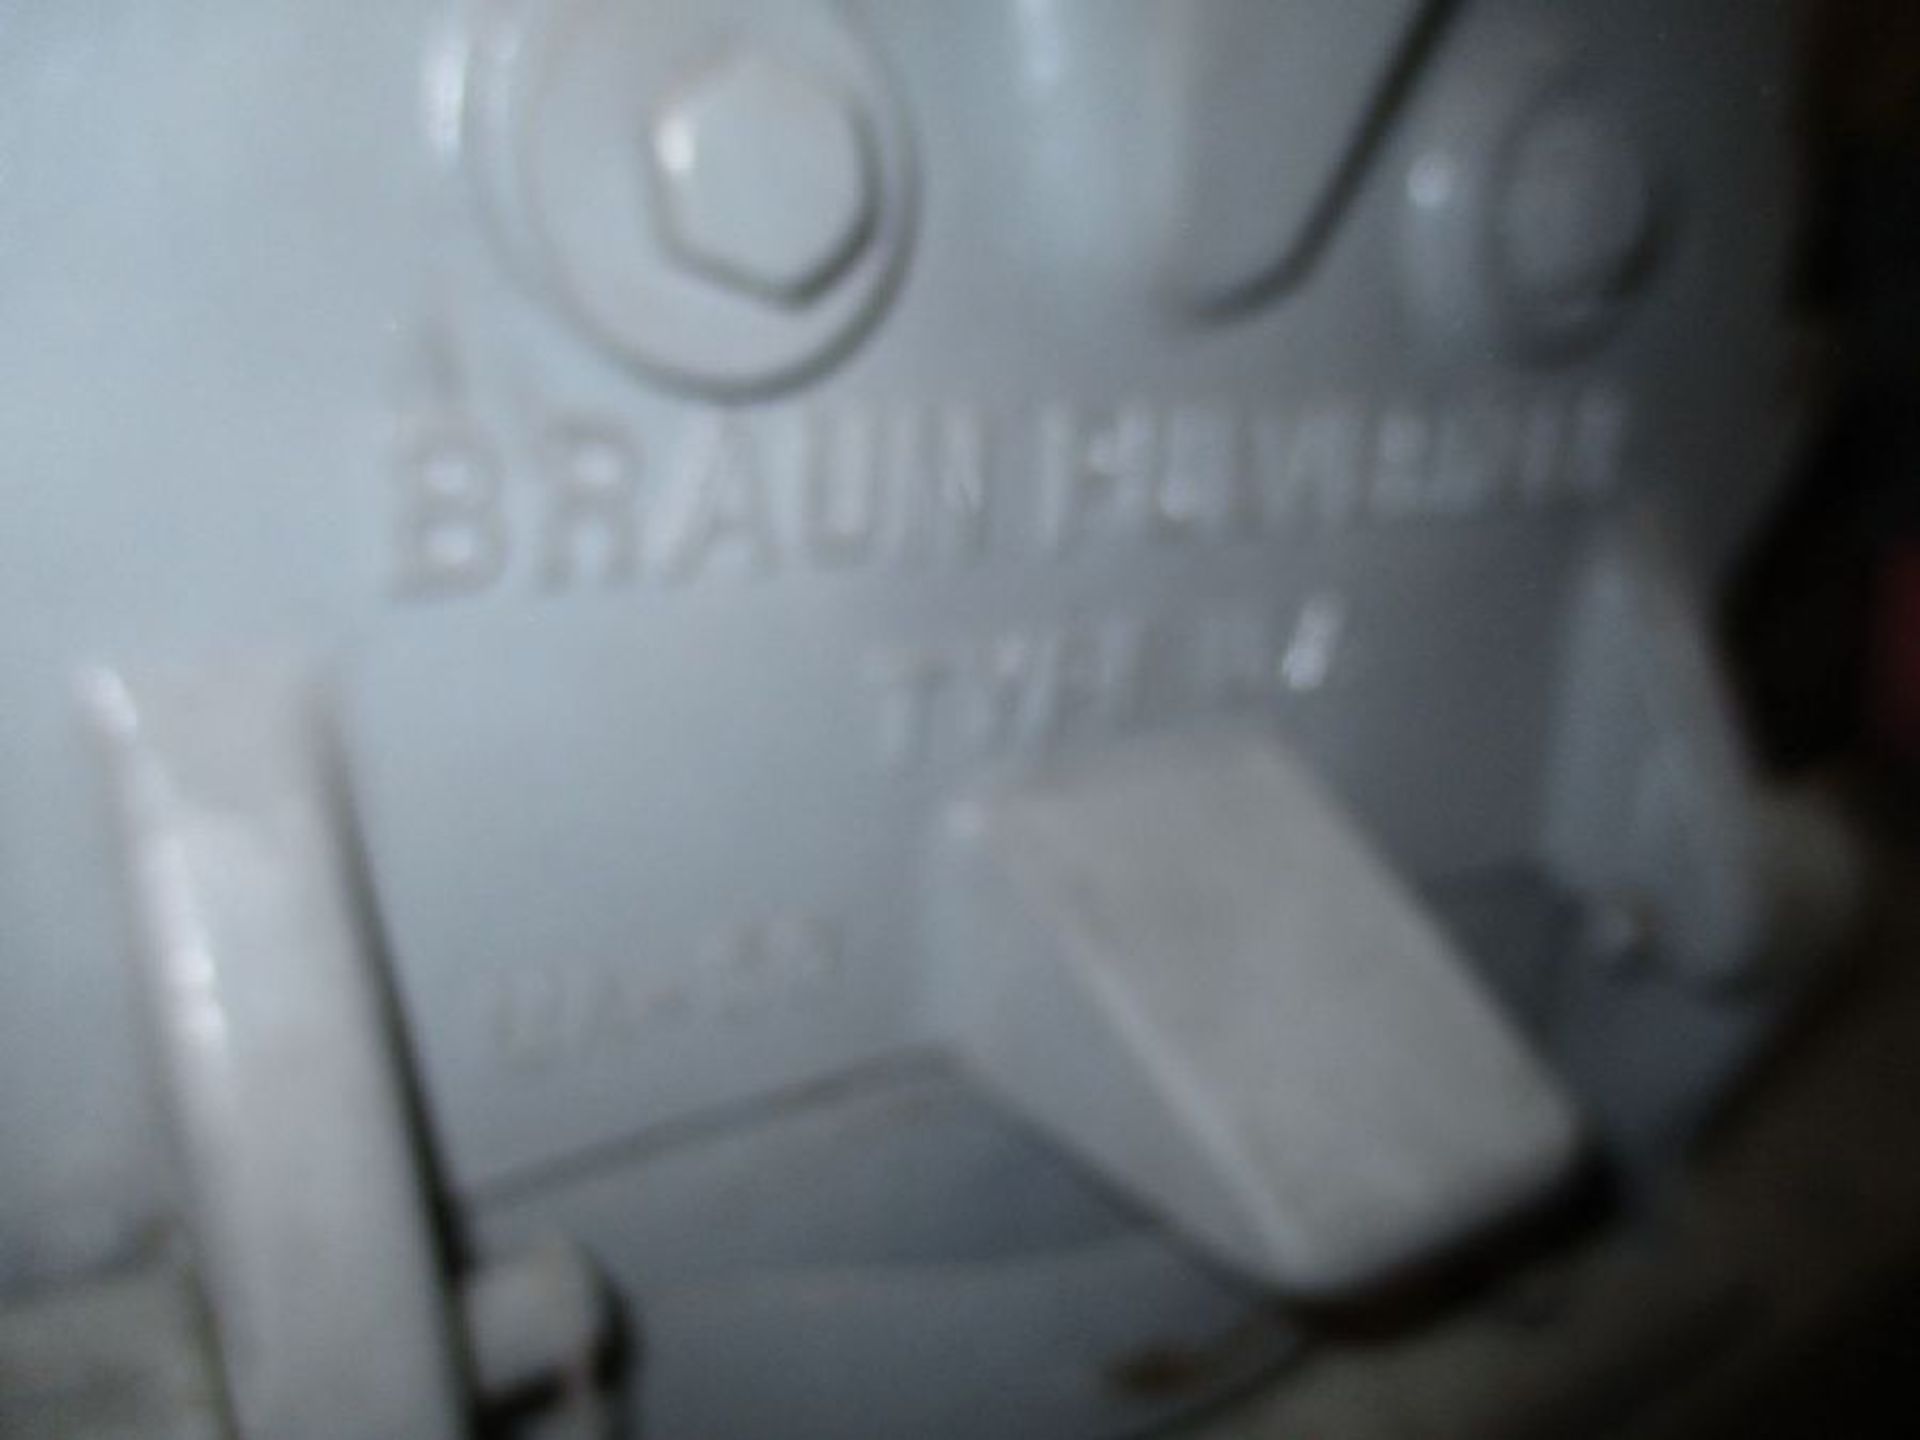 Braun Model LM-228 Benchtop Attrition Mill - Image 6 of 8